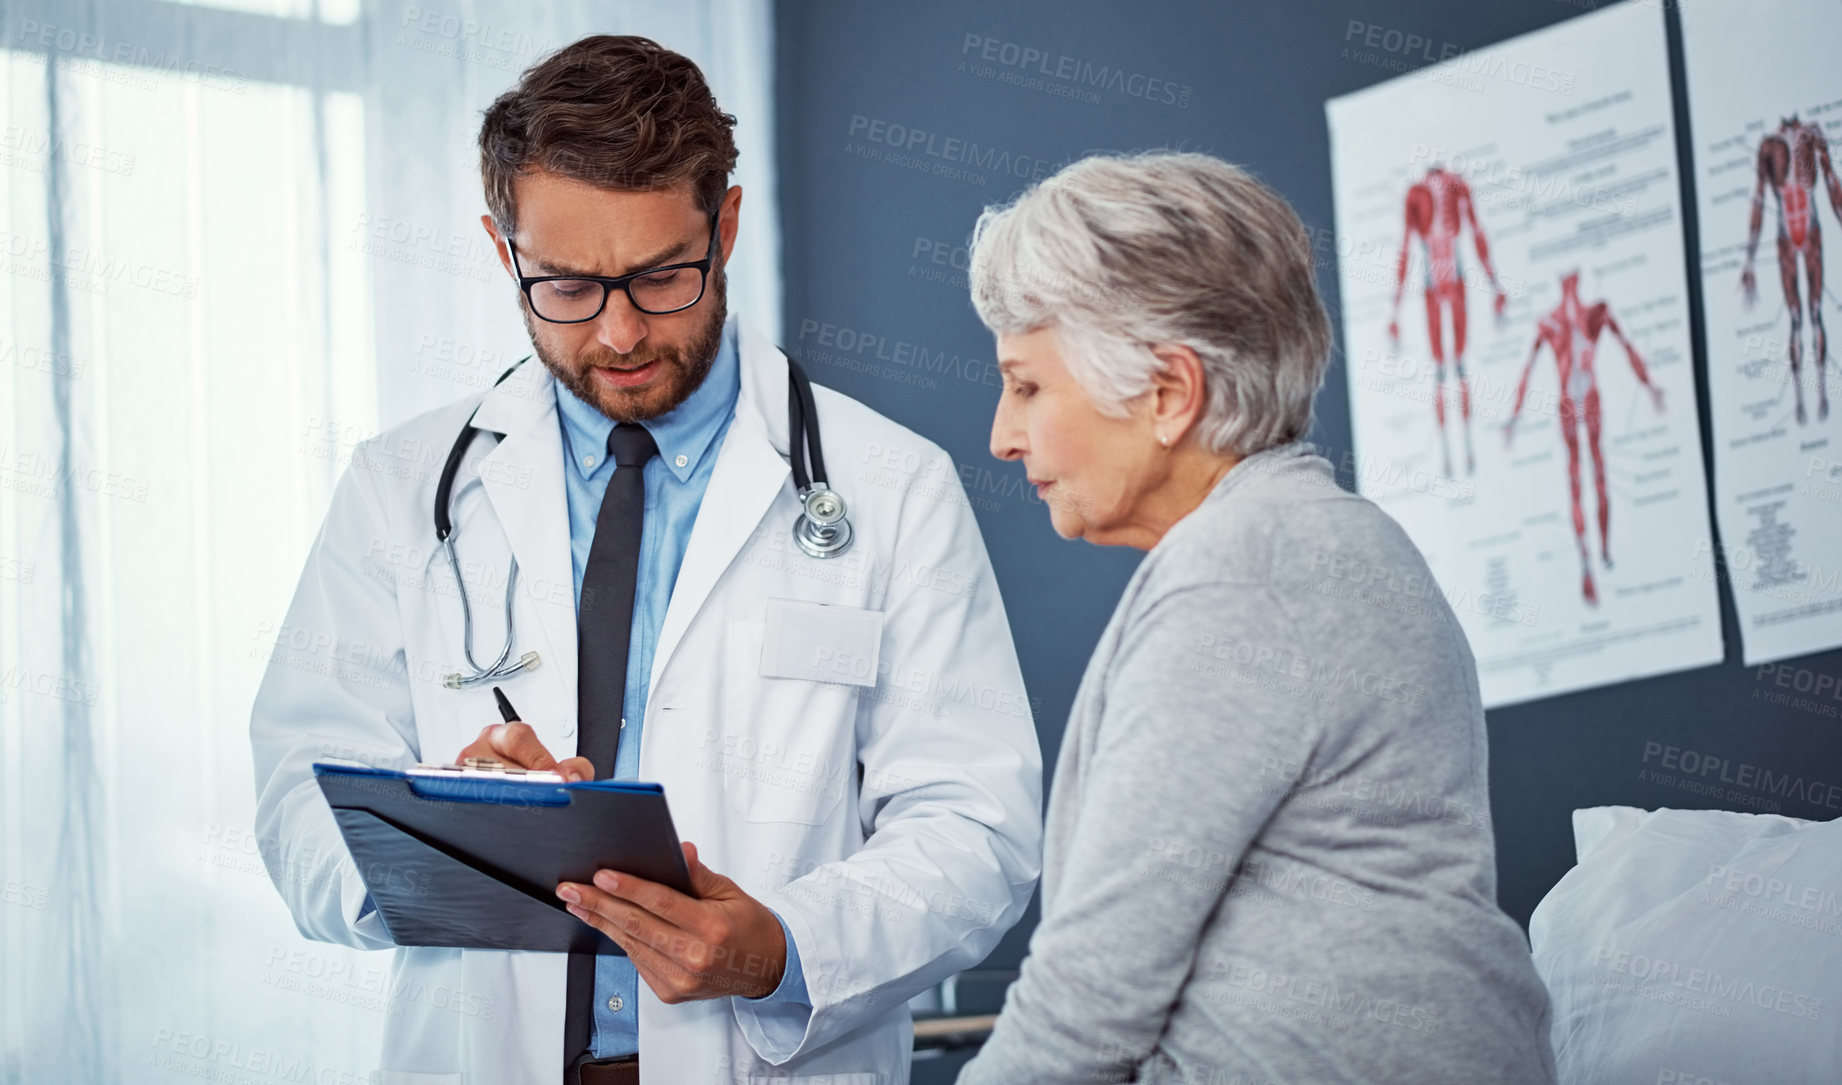 Buy stock photo Shot of a doctor writing notes while examining a senior patient in a clinic